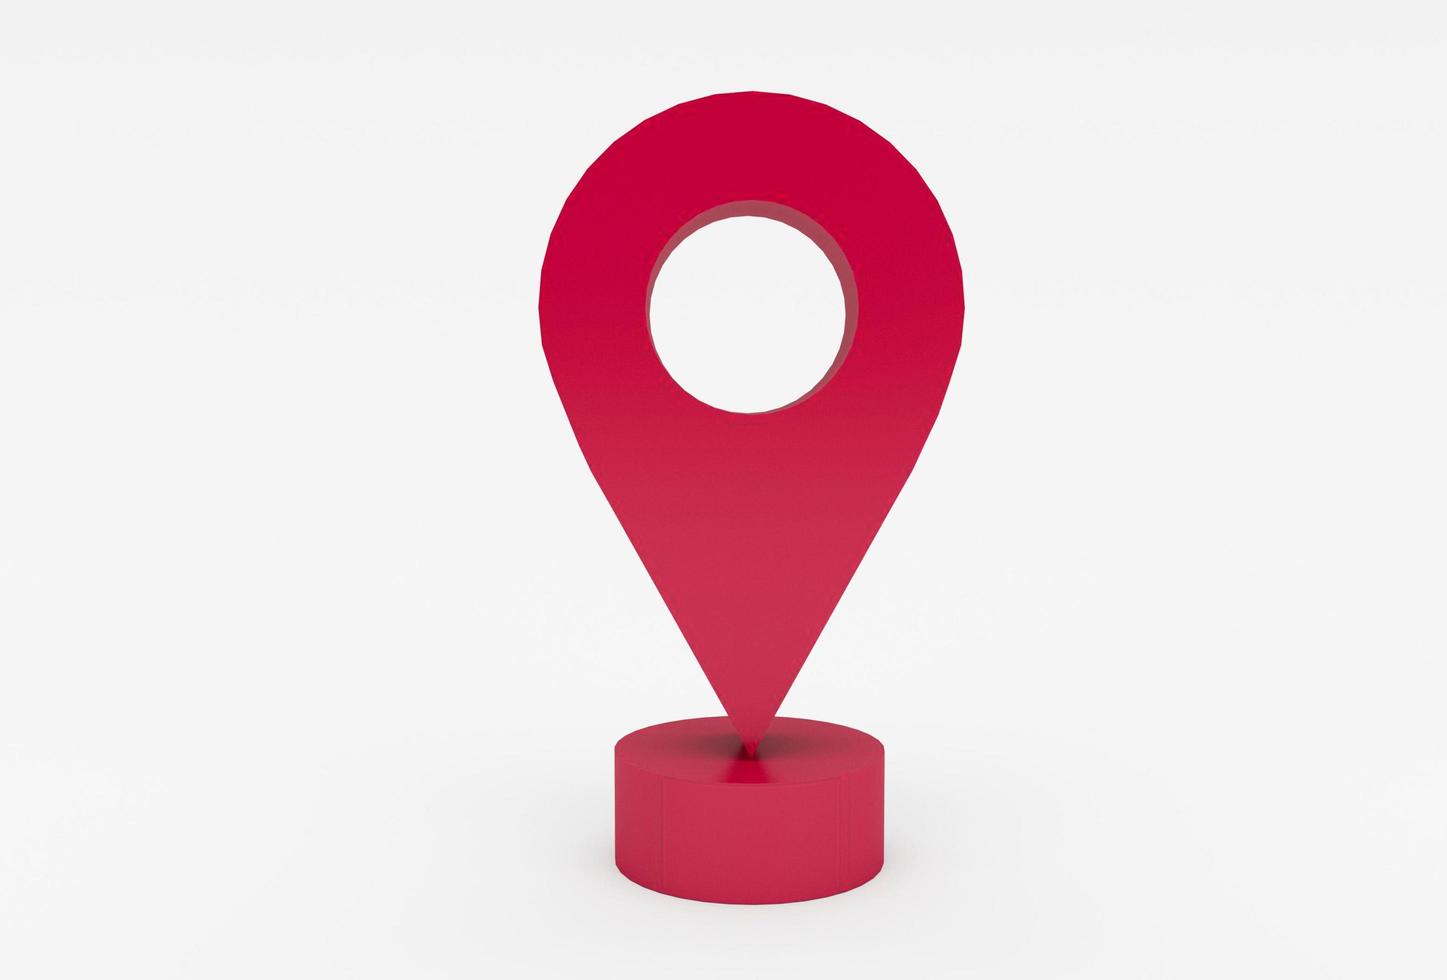 Location map pin gps pointer markers 3d illustration for destination minimal 3d rendering. photo